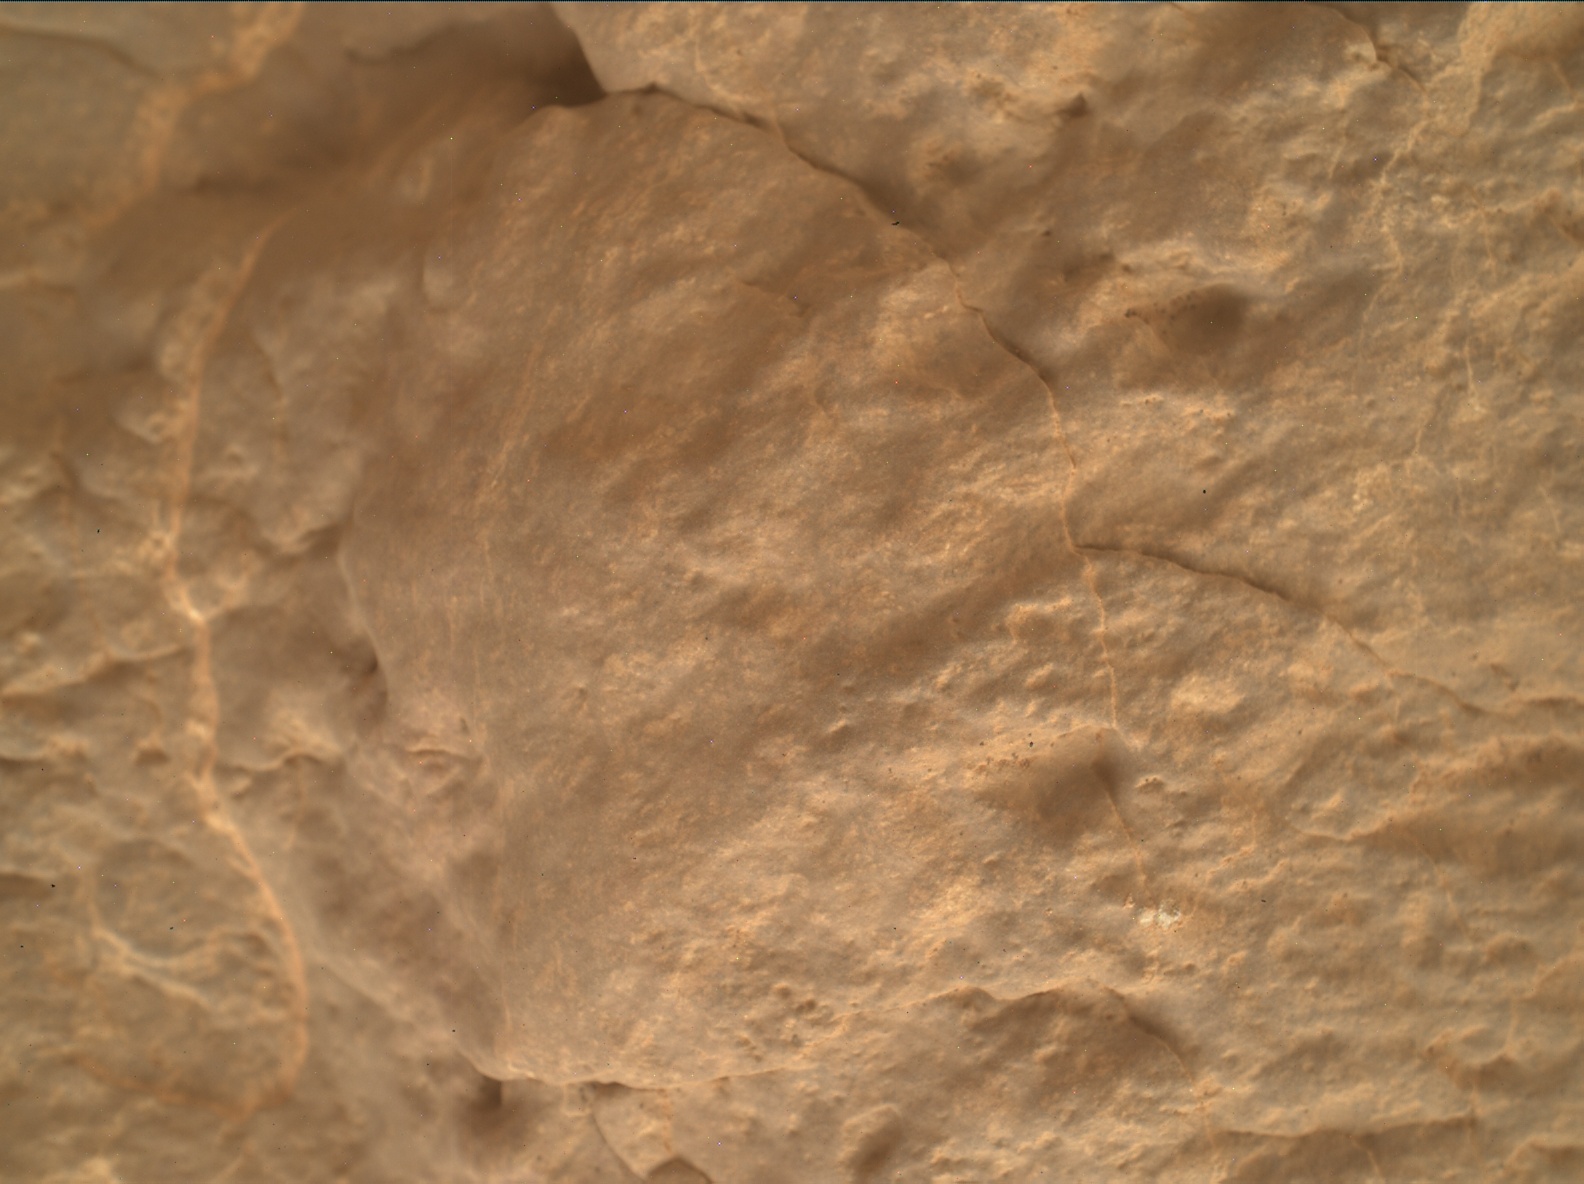 Nasa's Mars rover Curiosity acquired this image using its Mars Hand Lens Imager (MAHLI) on Sol 3555